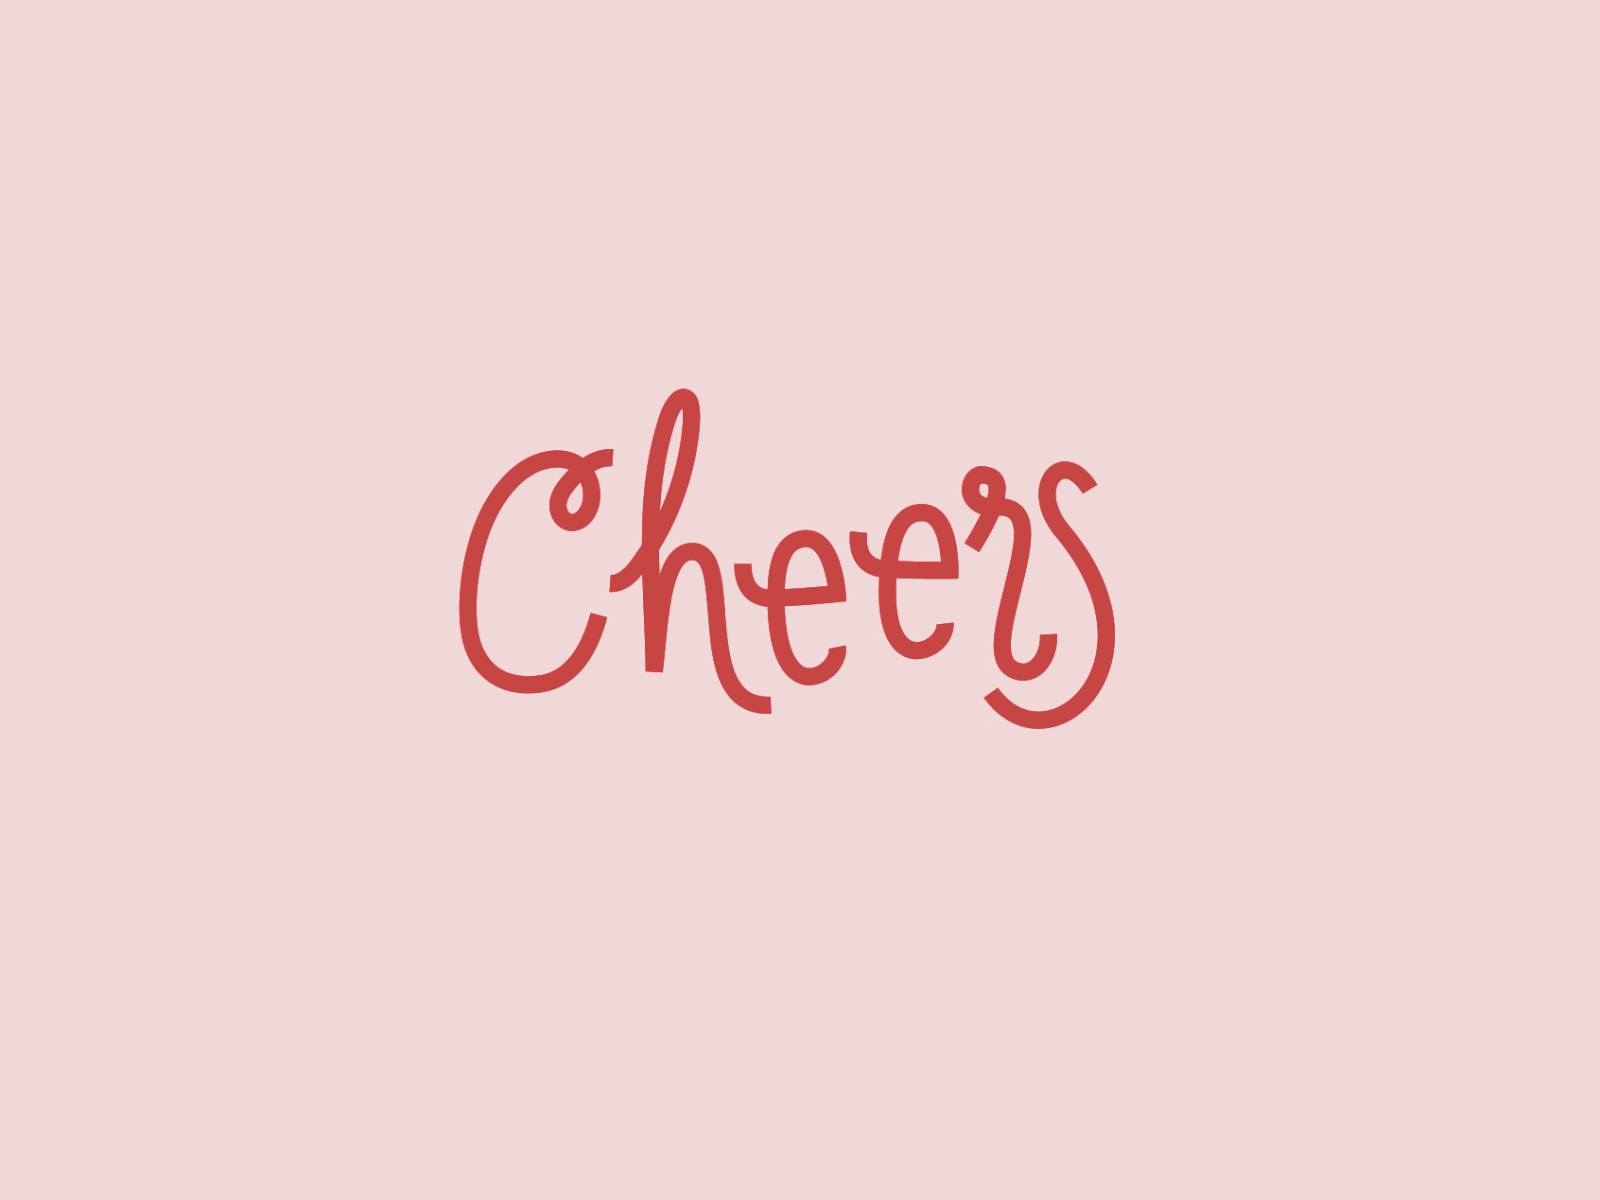 Cheers! after effects animation animation 2d cheers friyay glass illustration loop motion graphics new pink red repeat typogaphy vector wine wineglass